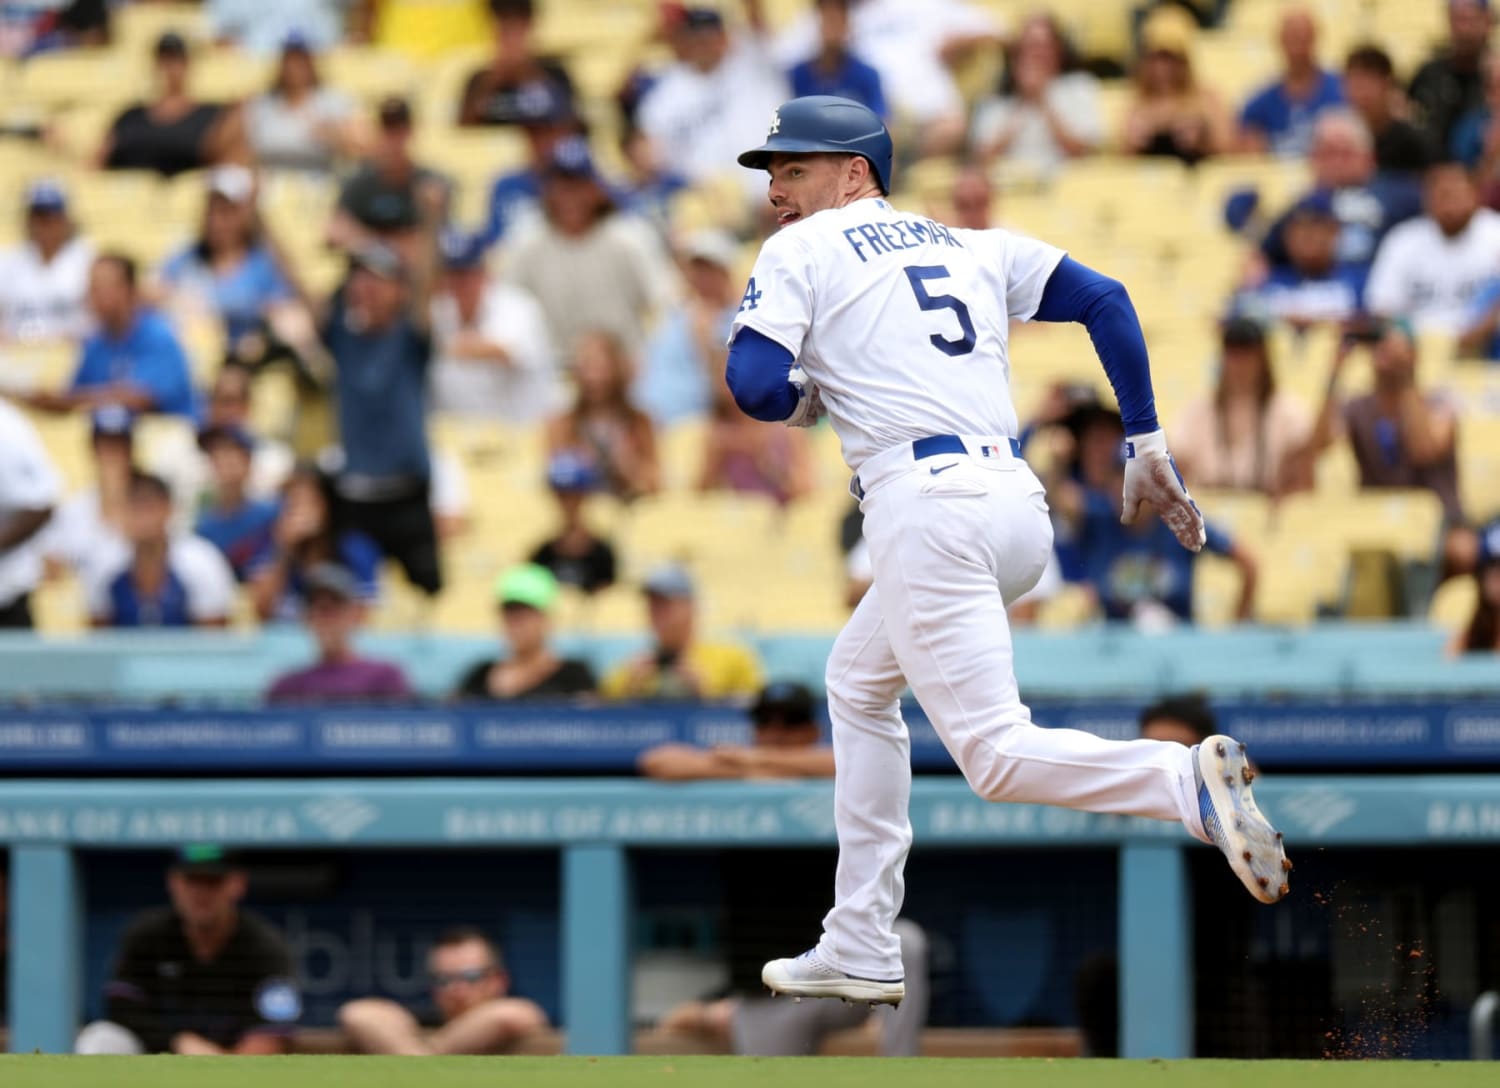 Muncy hits 2 more homers, powers Dodgers past Giants 10-5